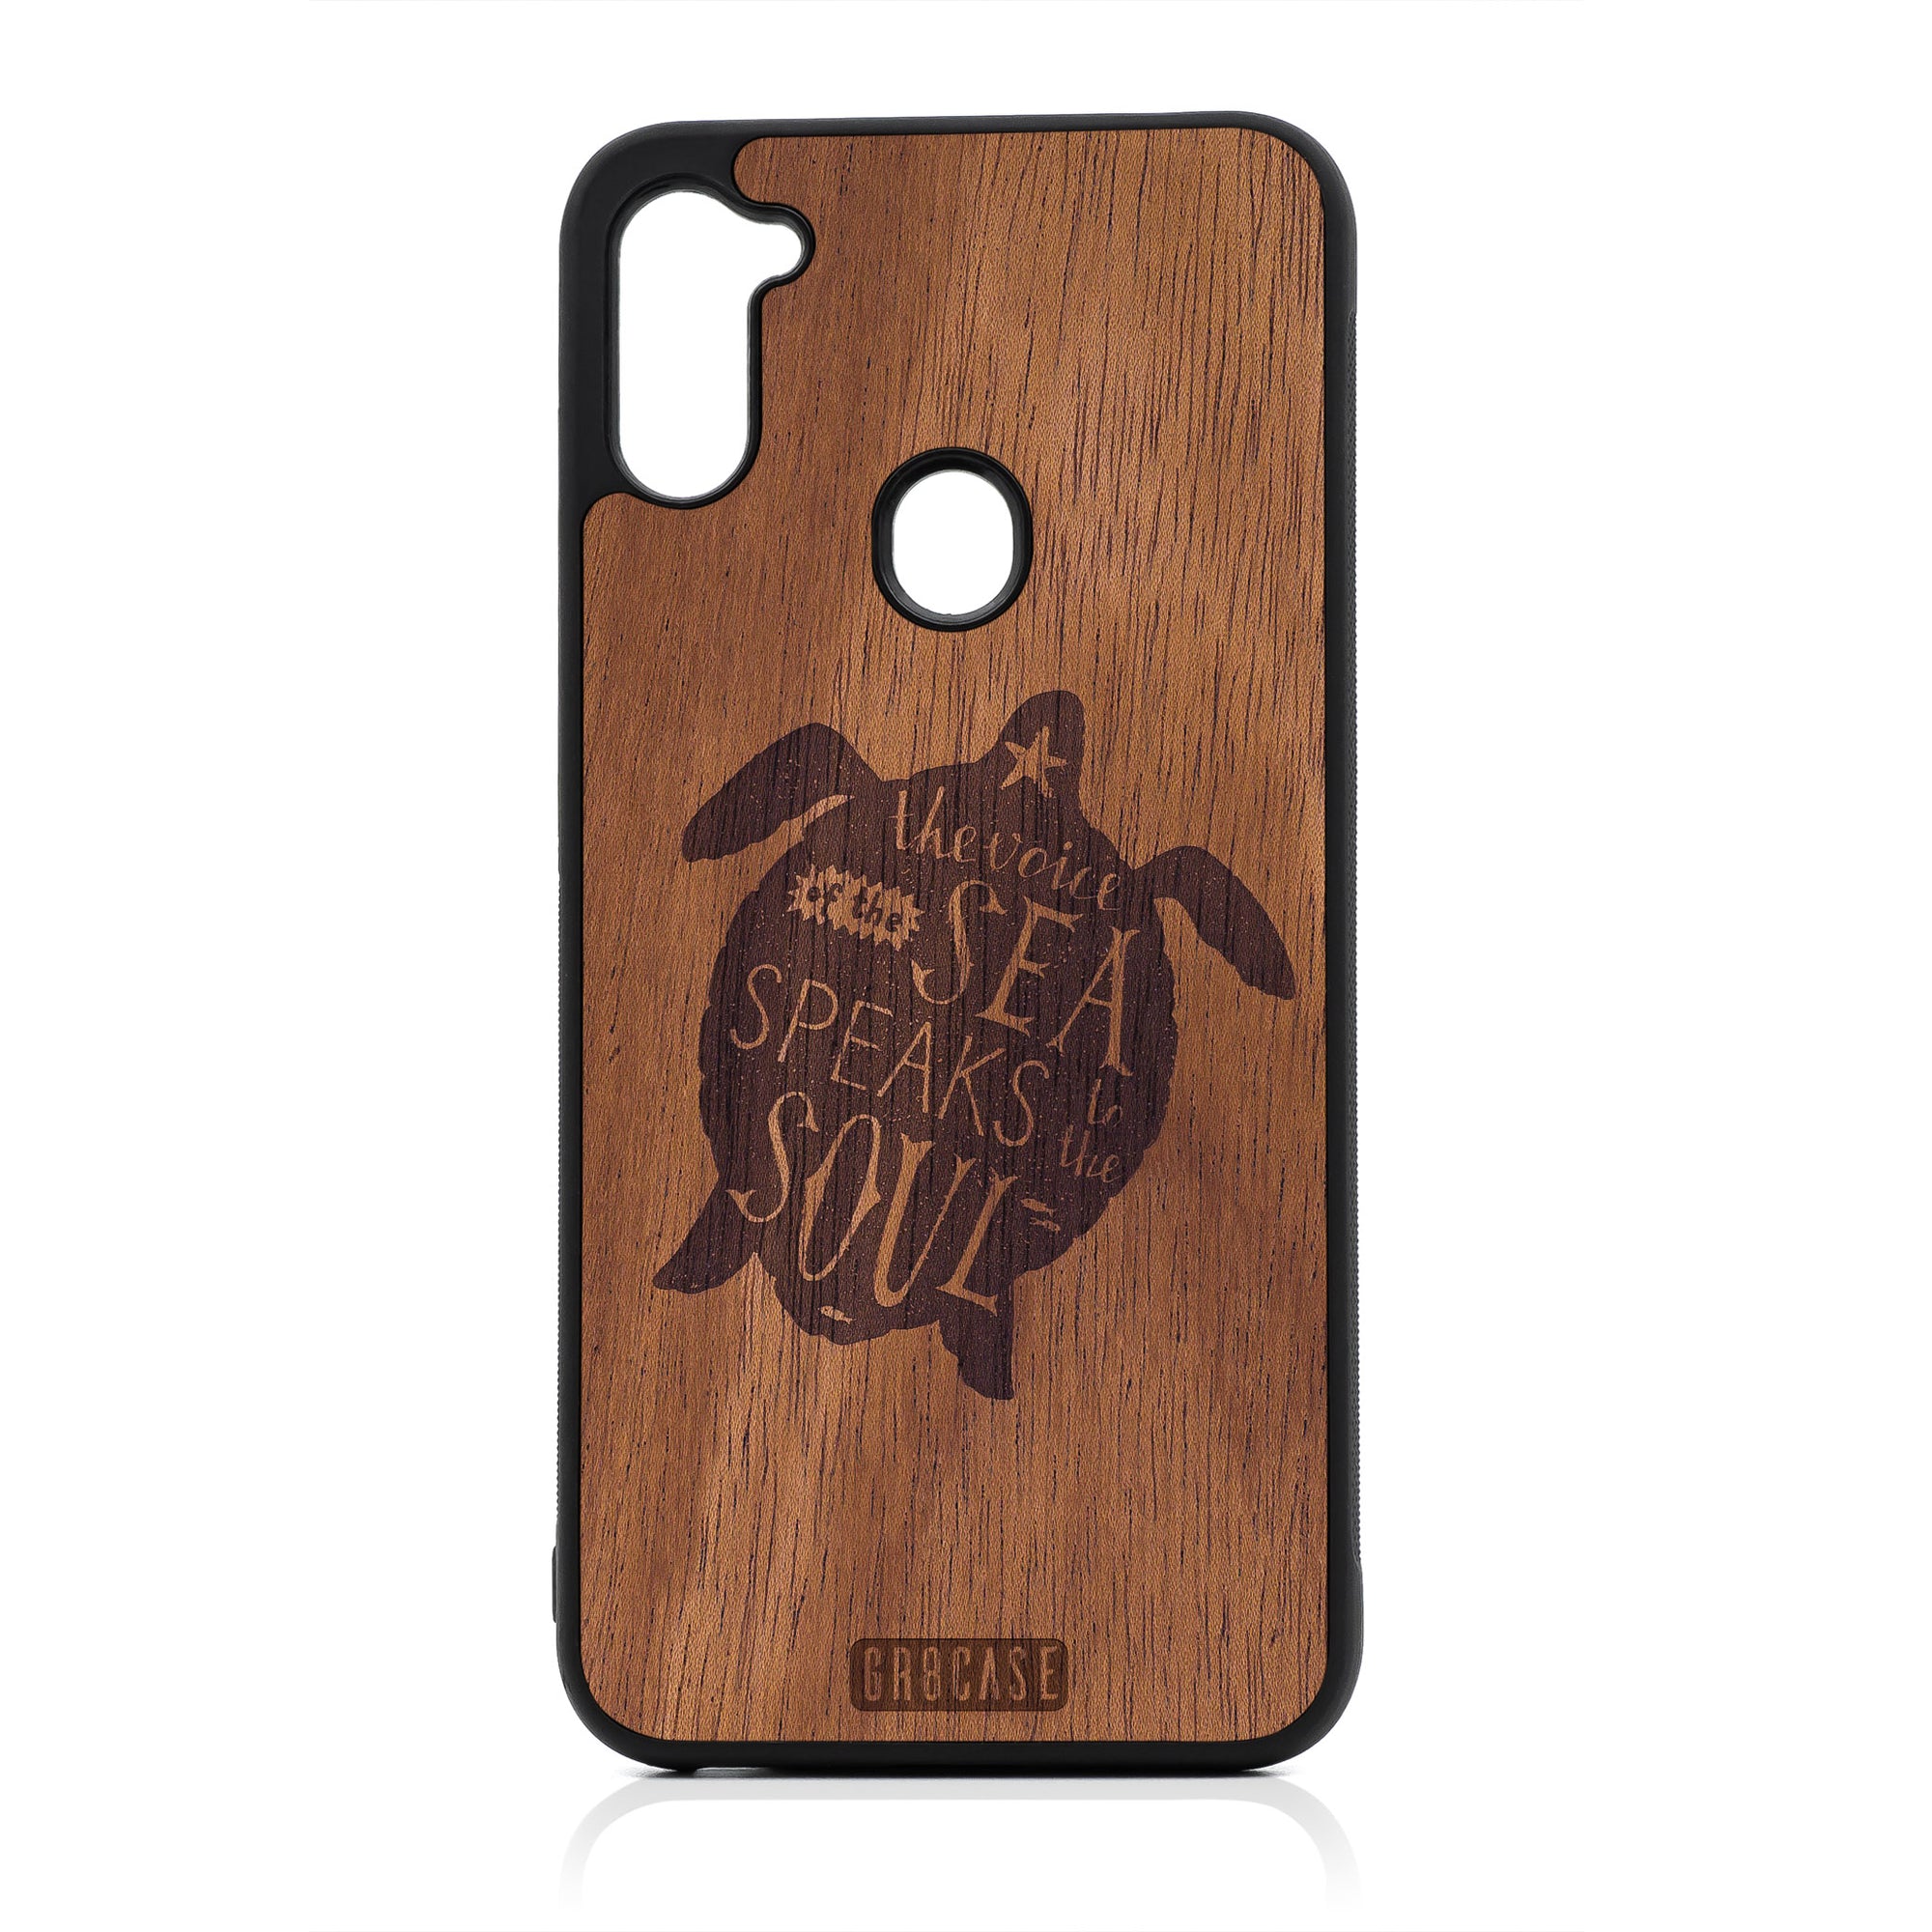 The Voice Of The Sea Speaks To The Soul (Turtle) Design Wood Case For Samsung Galaxy A11